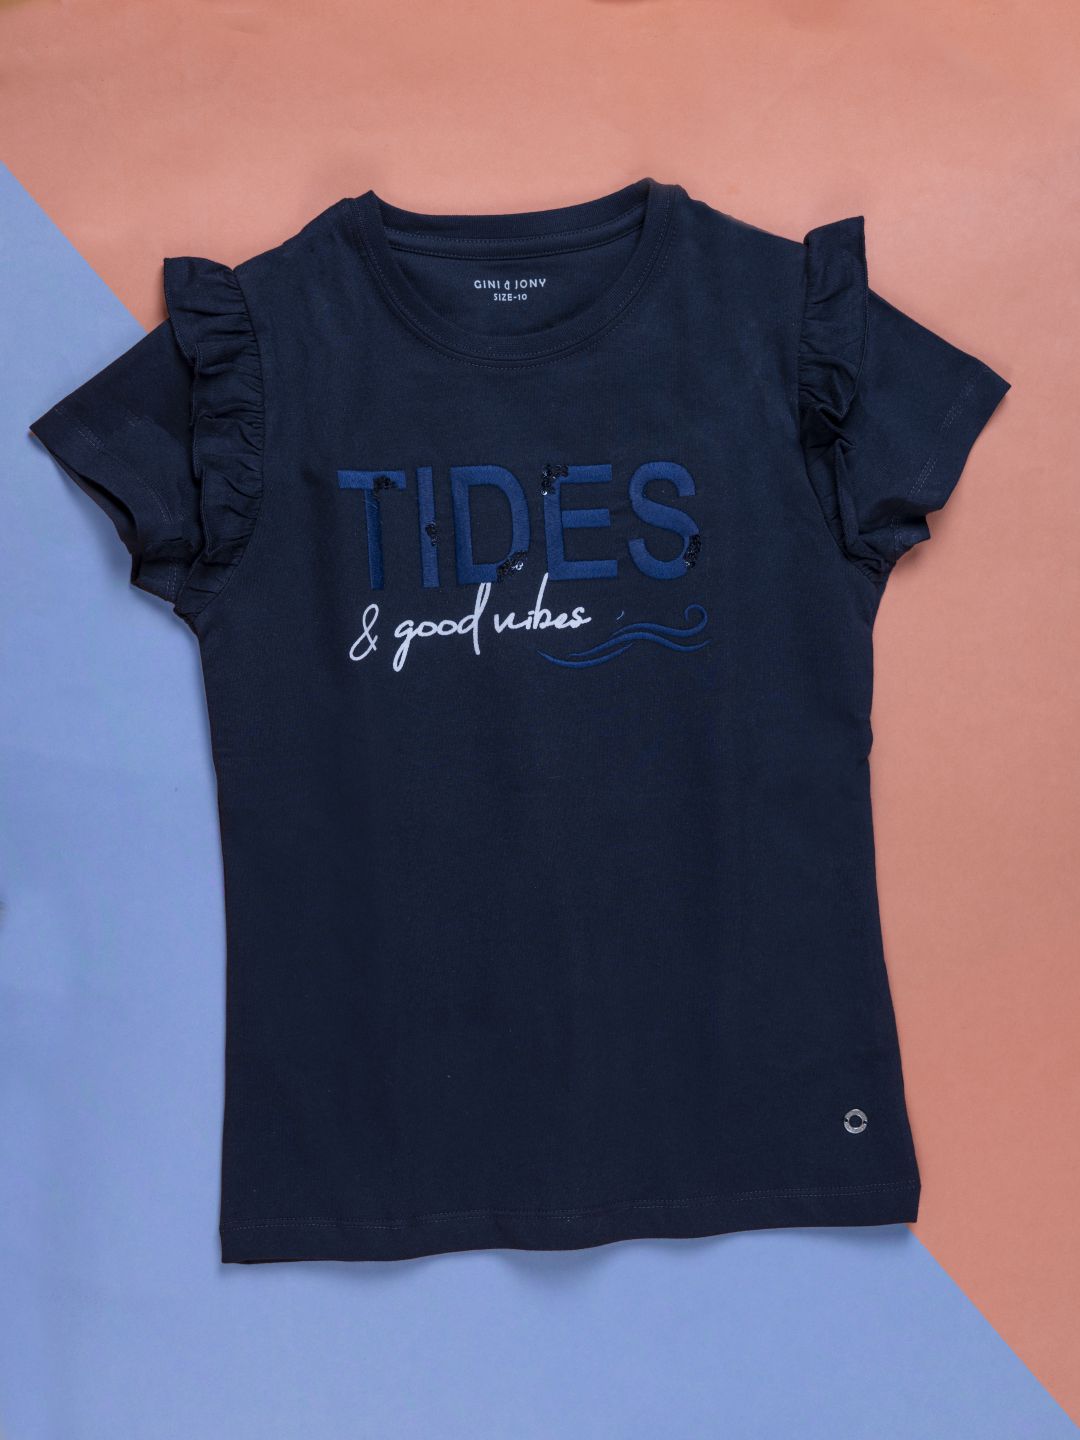 Girls blue round neck knitted cotton embroidered top.